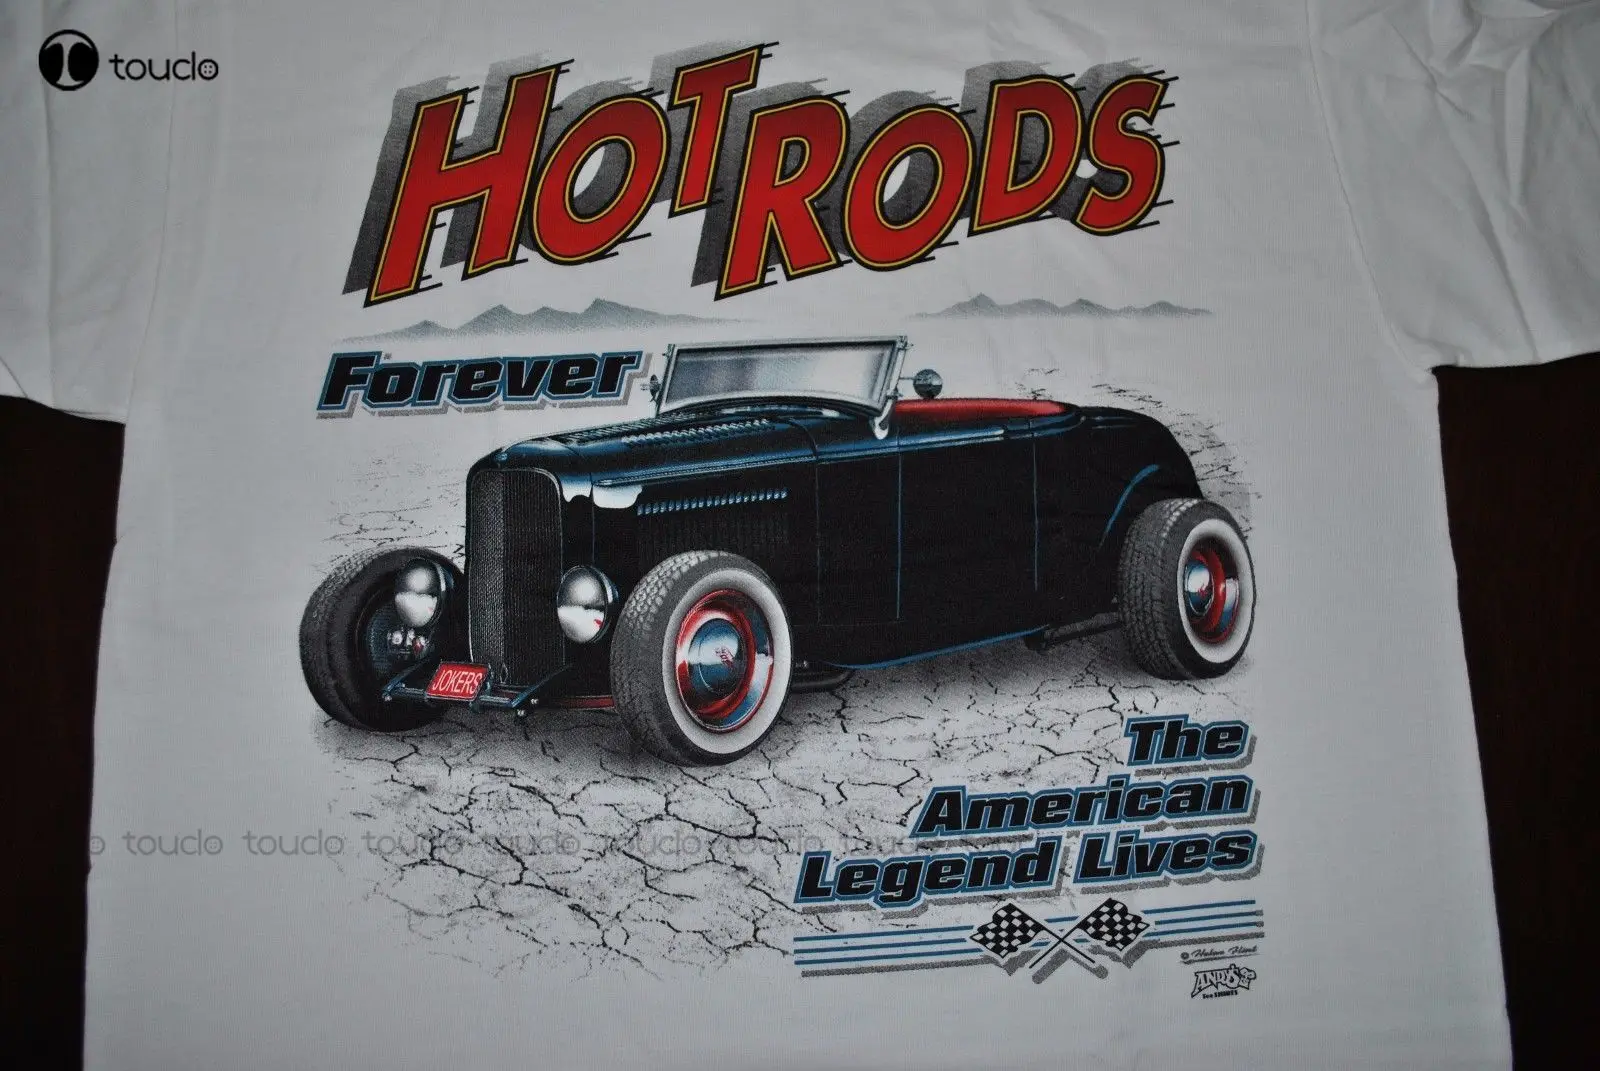 

Fashion Summer Style Funny Hot Rods Forever 1932 American Classic Car Fans Roadster Tee Shirt American Legend Tops Tshirts